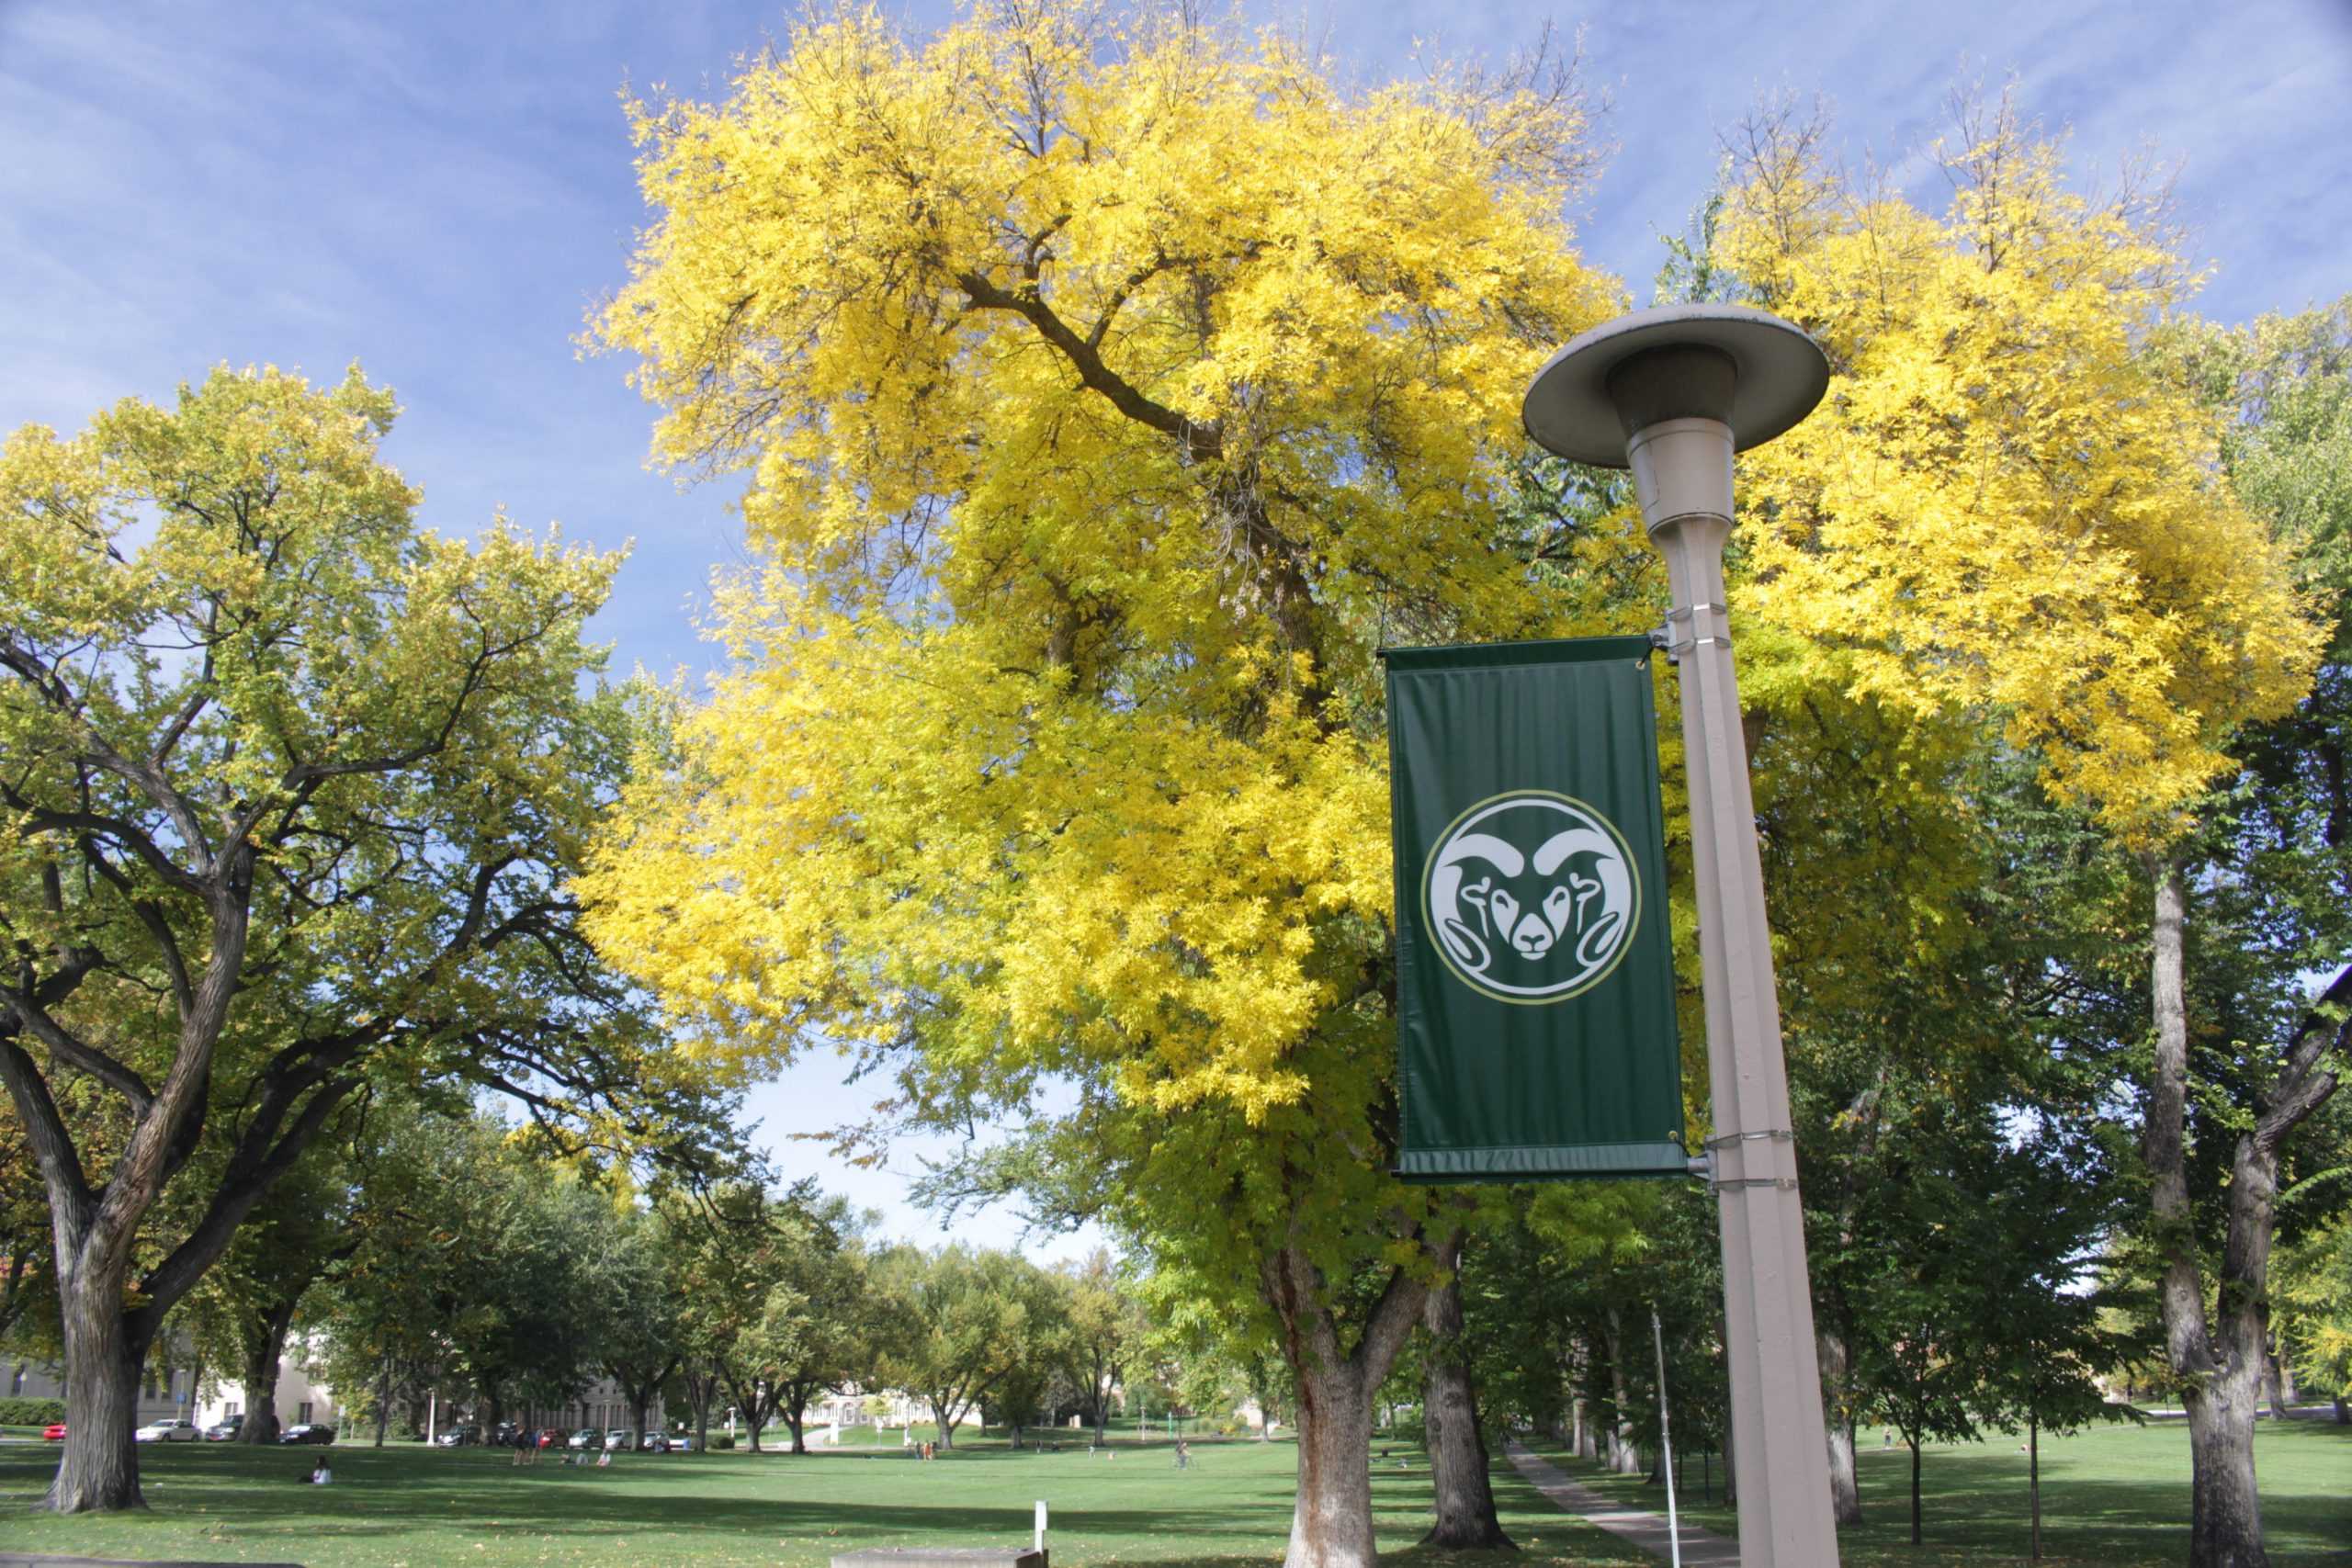 The CSU banner attached to a lamp post.